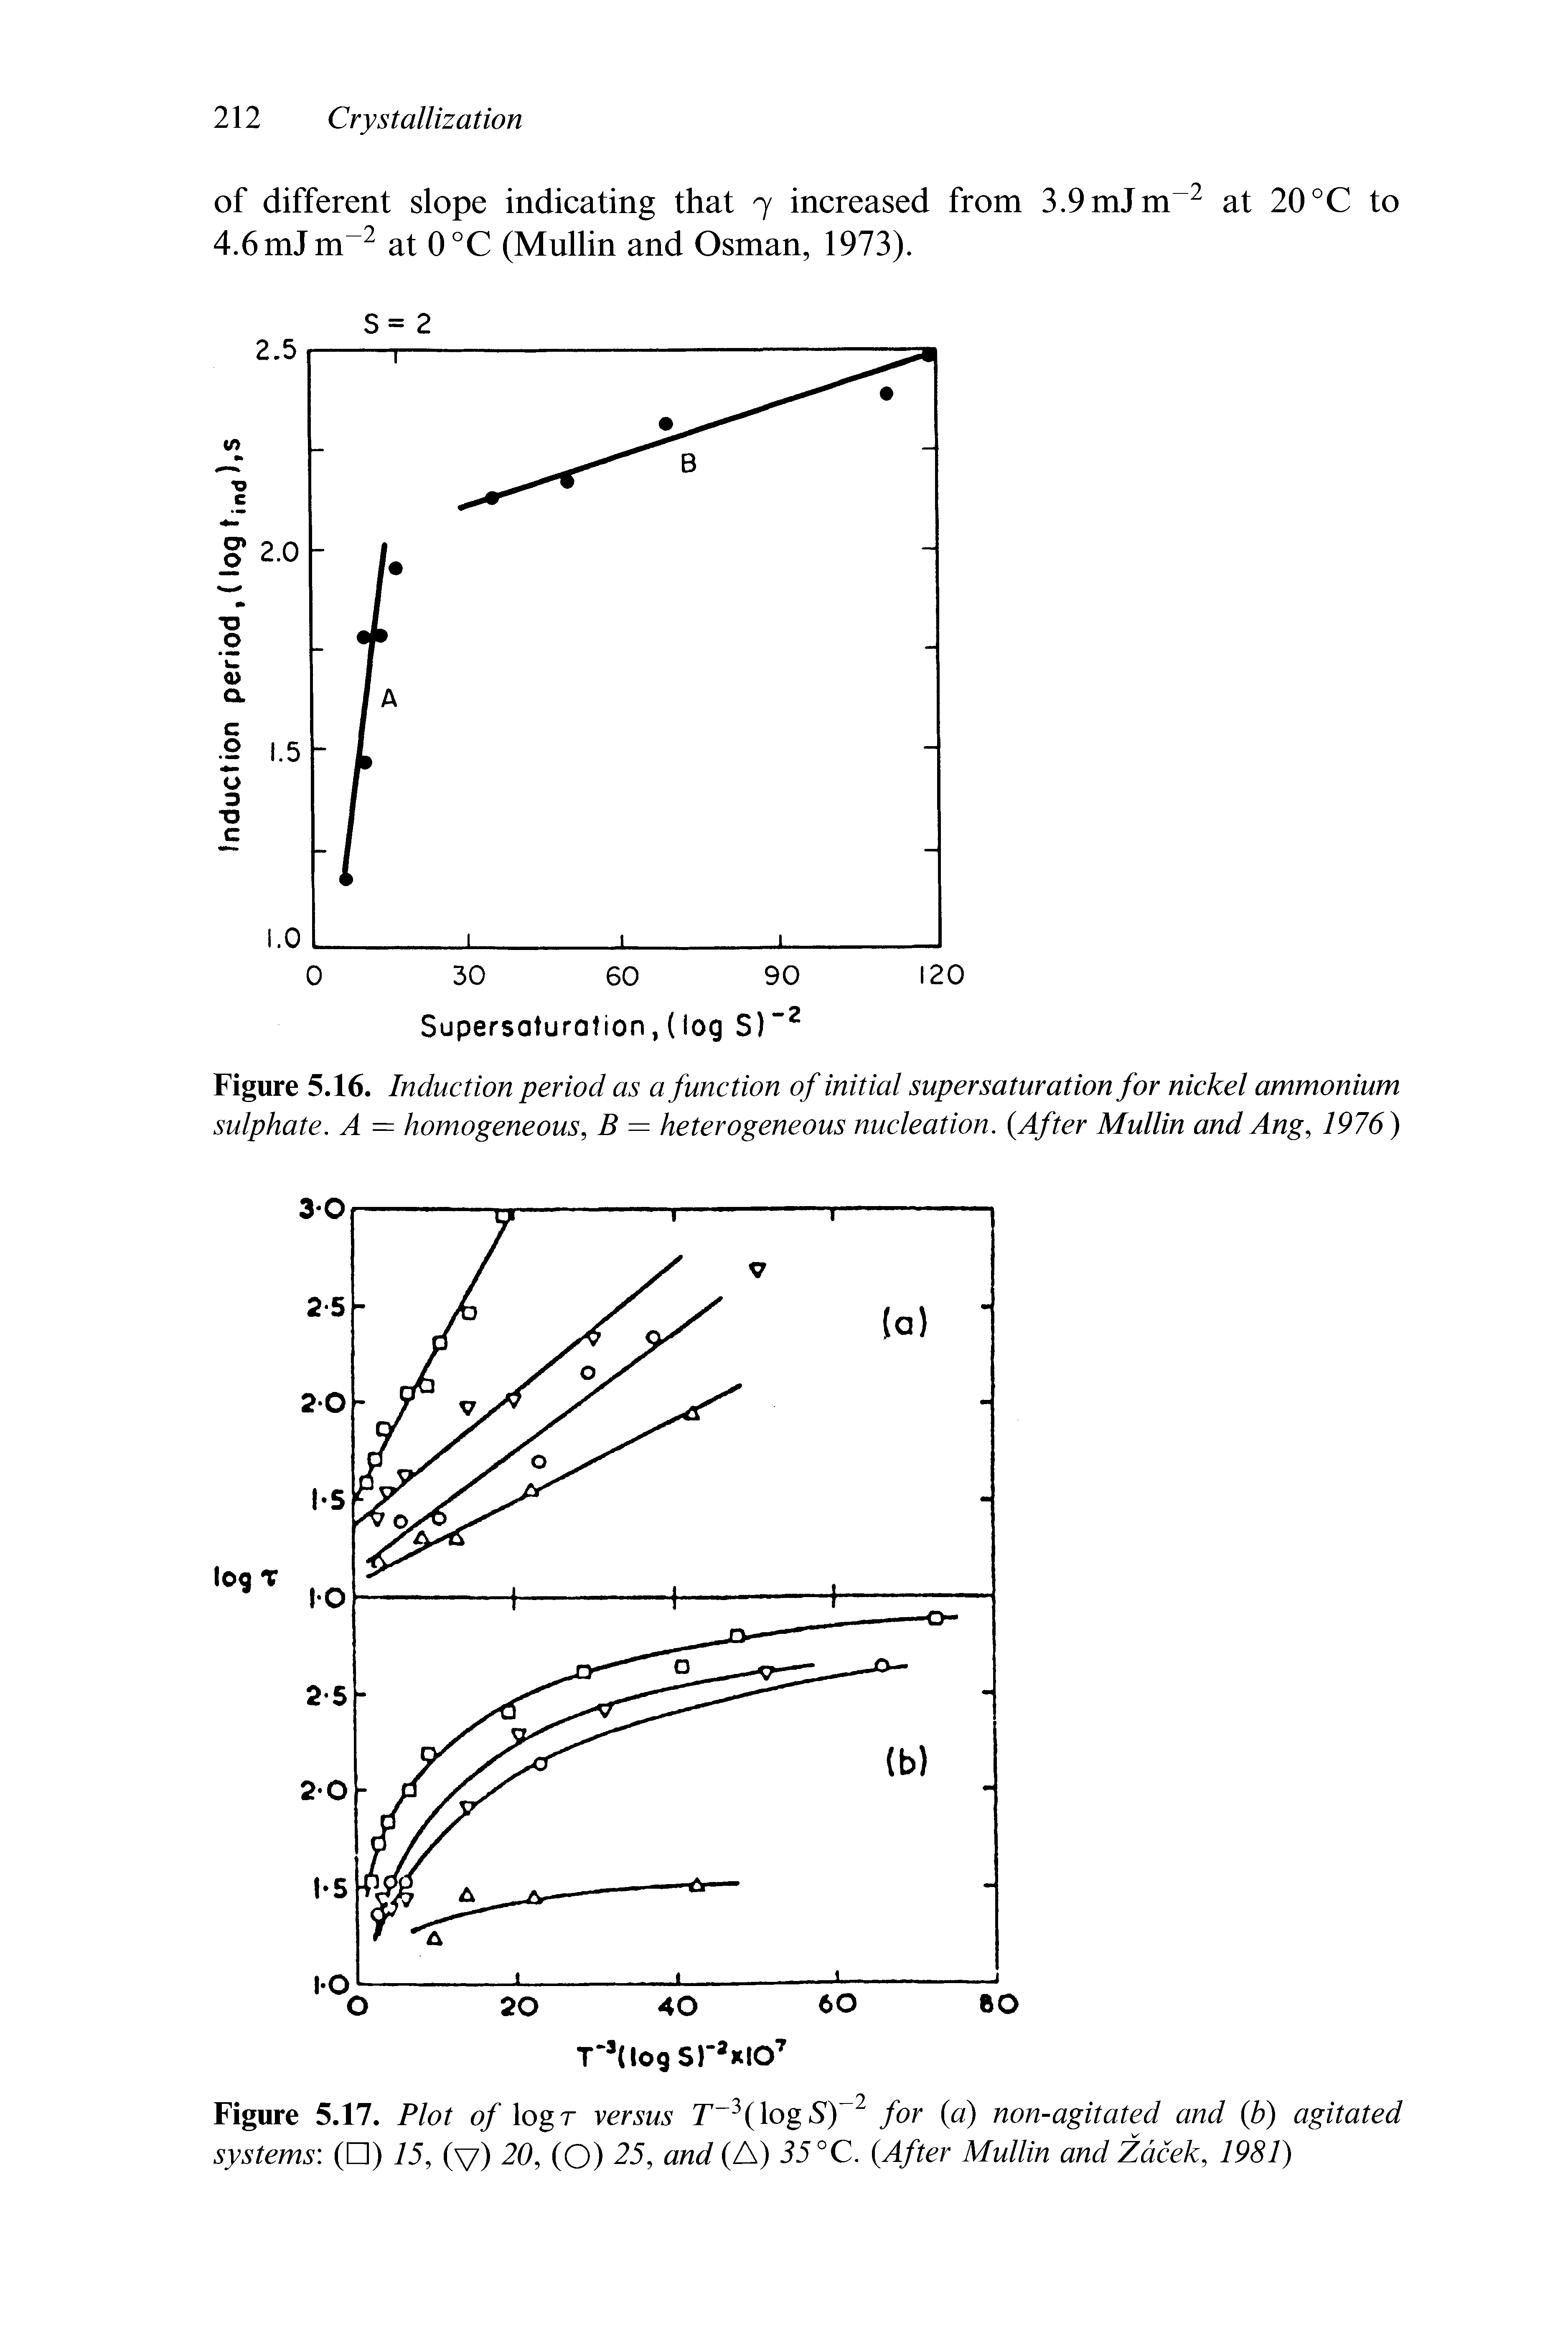 Figure 5.16. Induction period as a function of initial super saturation for nickel ammonium sulphate. A = homogeneous, B = heterogeneous nucleation. After Mullin and Ang, 1976)...